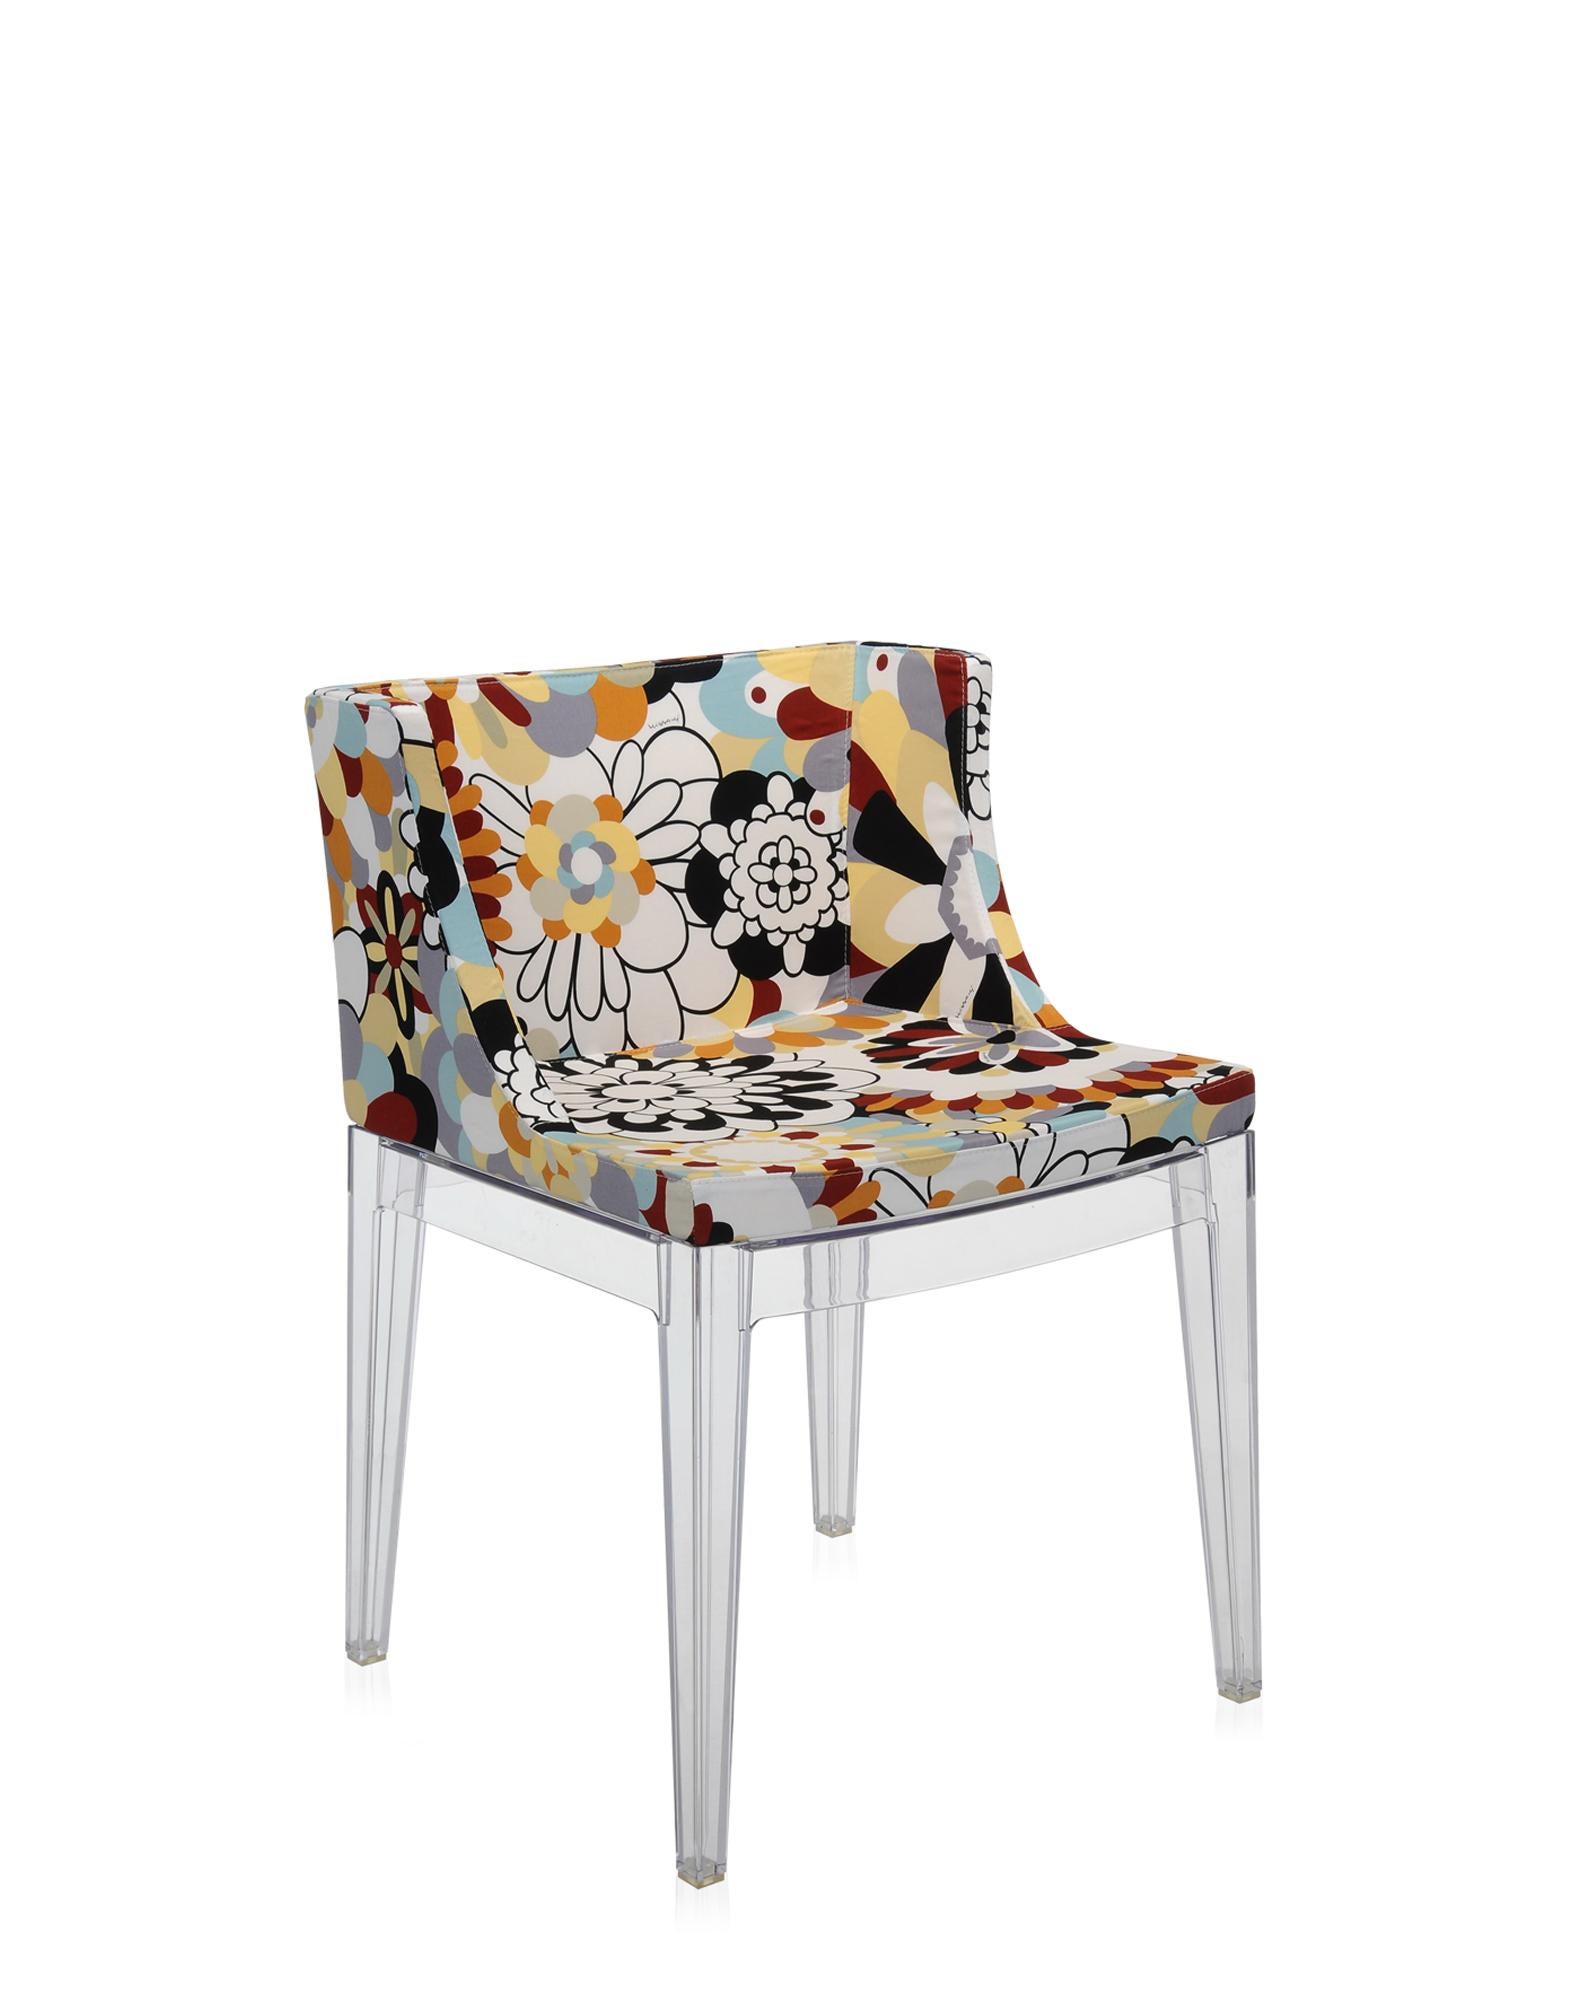 The Mademoiselle armchair is dressed in the wide range of Memphis fabrics, designed by Ettore Sottsass and Nathalie du Pasquier.
It comes either with transparent or black frame.
  